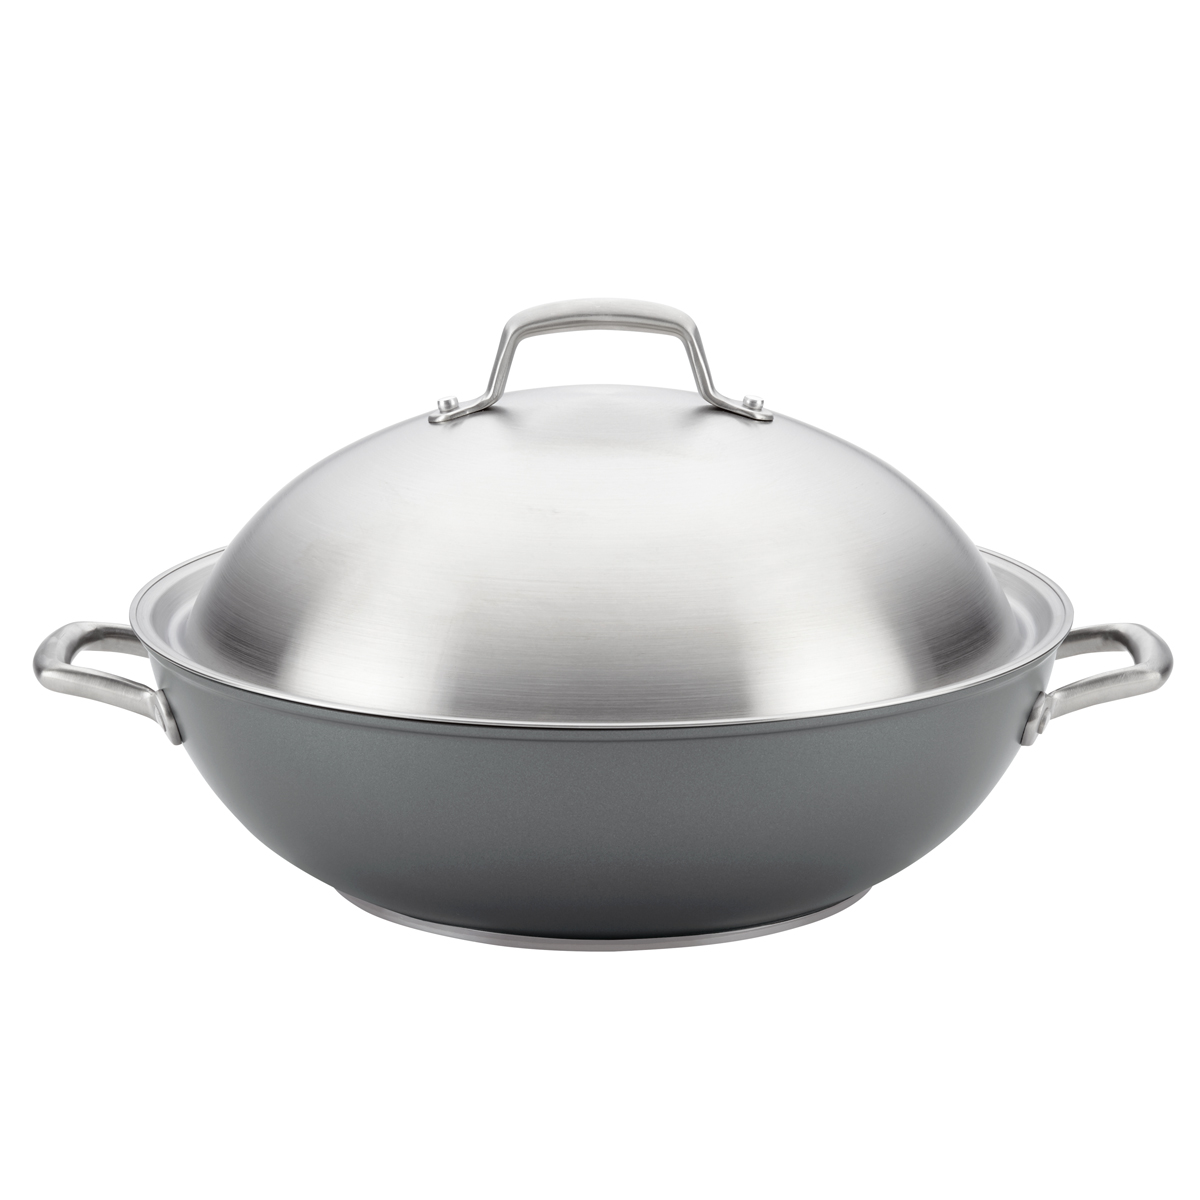 Anolon(R) Accolade 13.5in. Hard-Anodized Nonstick Wok